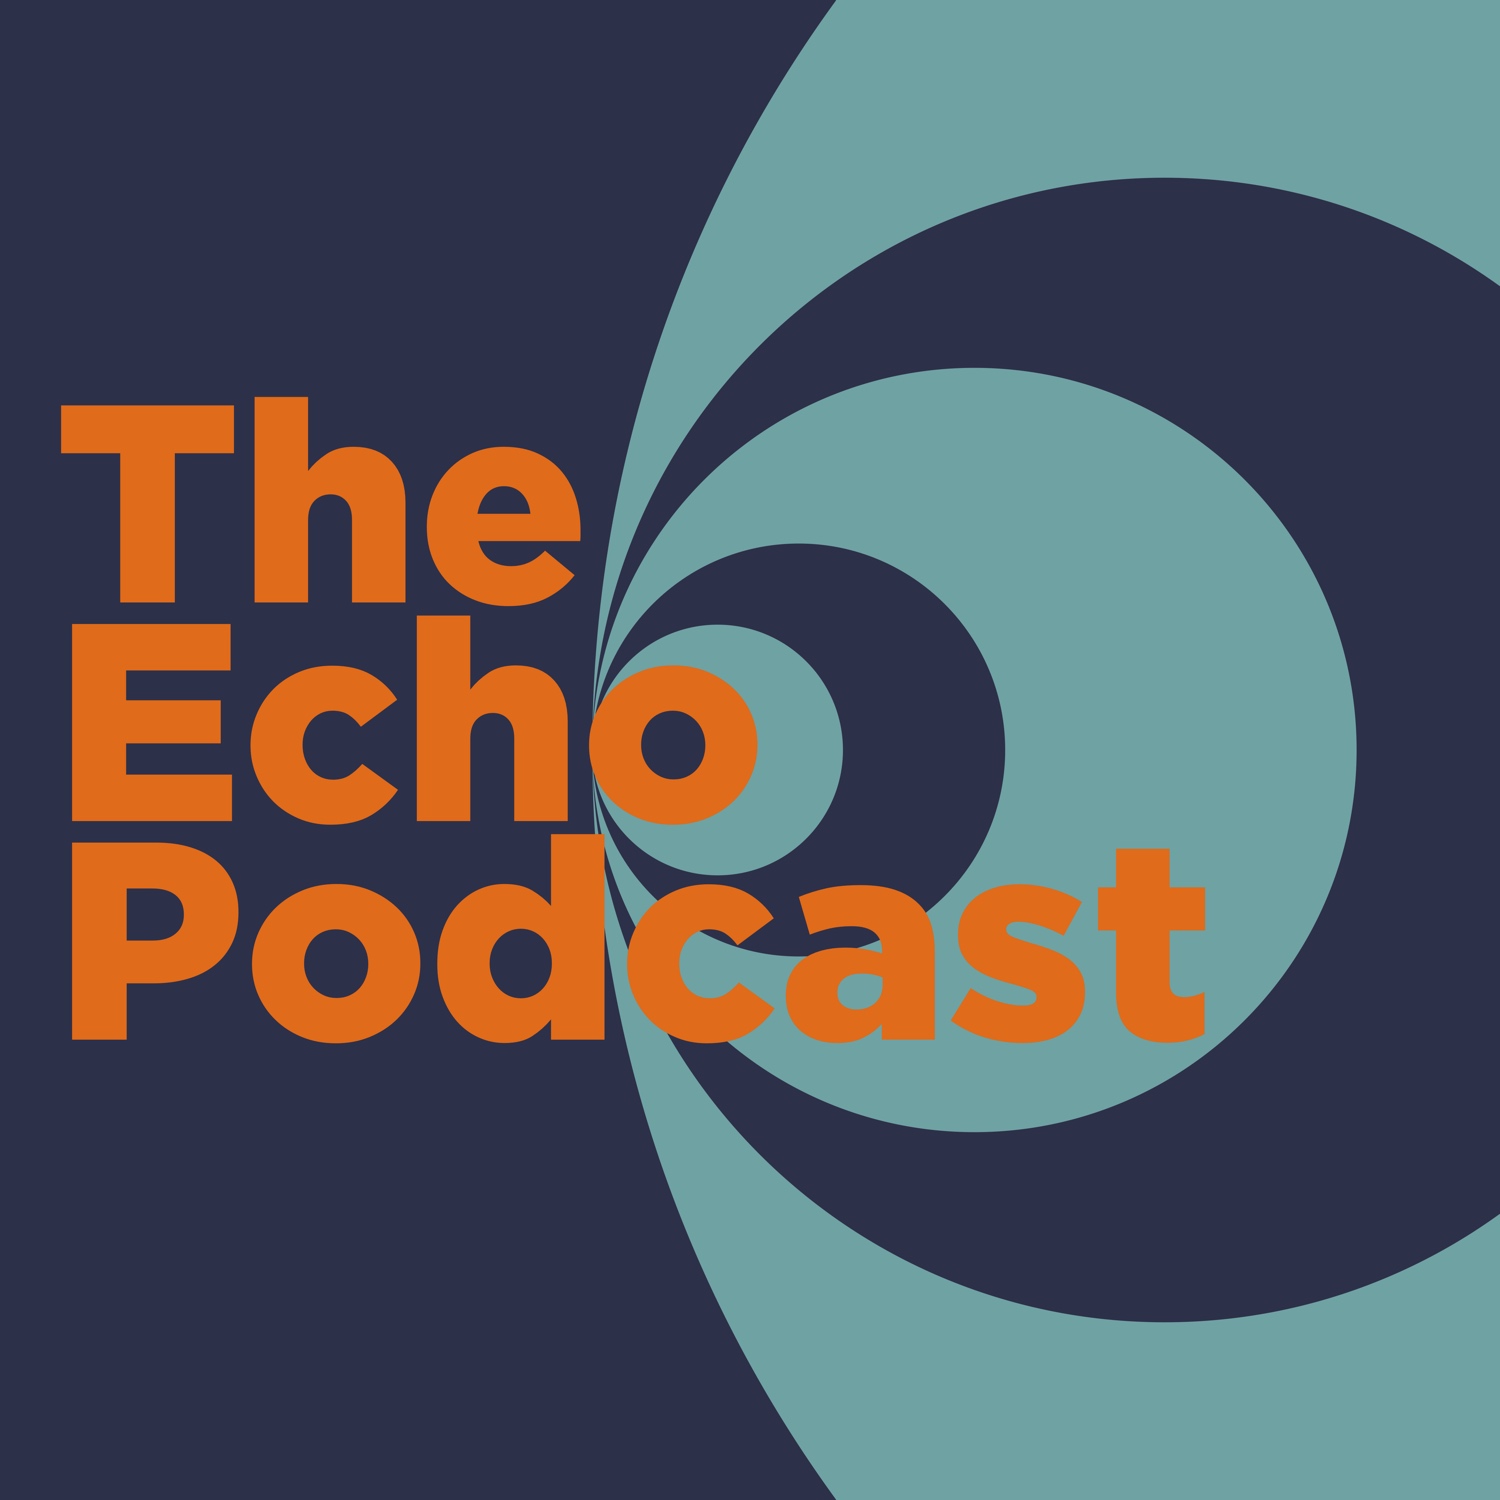 The Echo Podcast